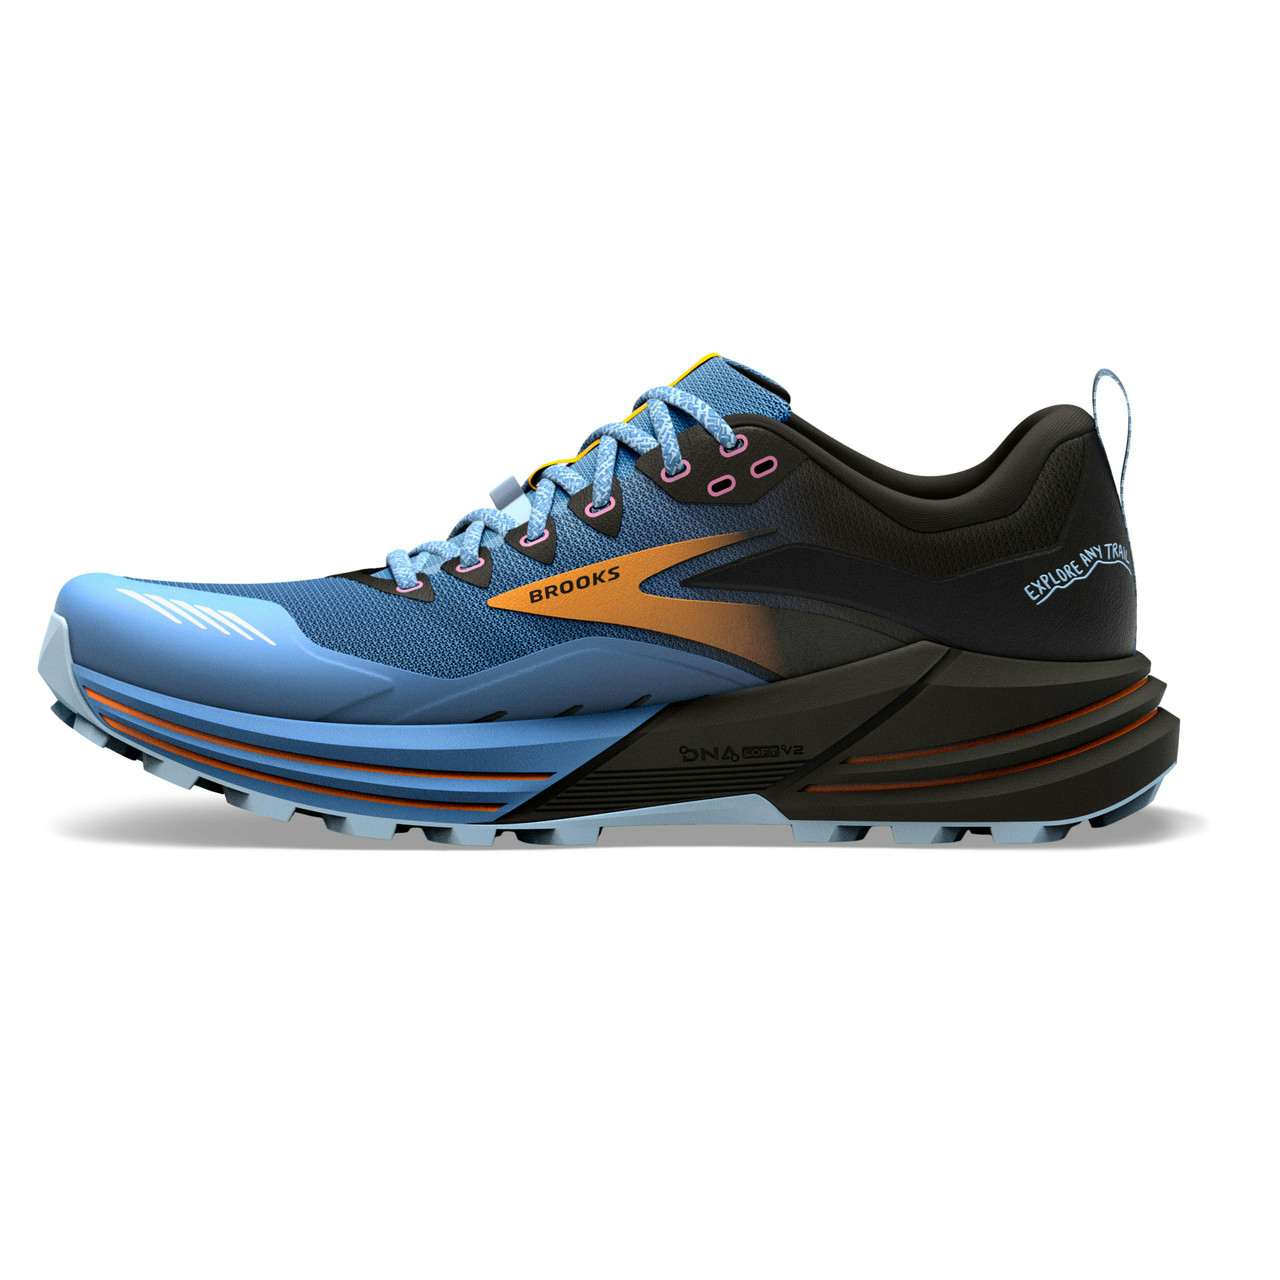 Cascadia 16 Trail Running Shoes Blue/Black/Yellow